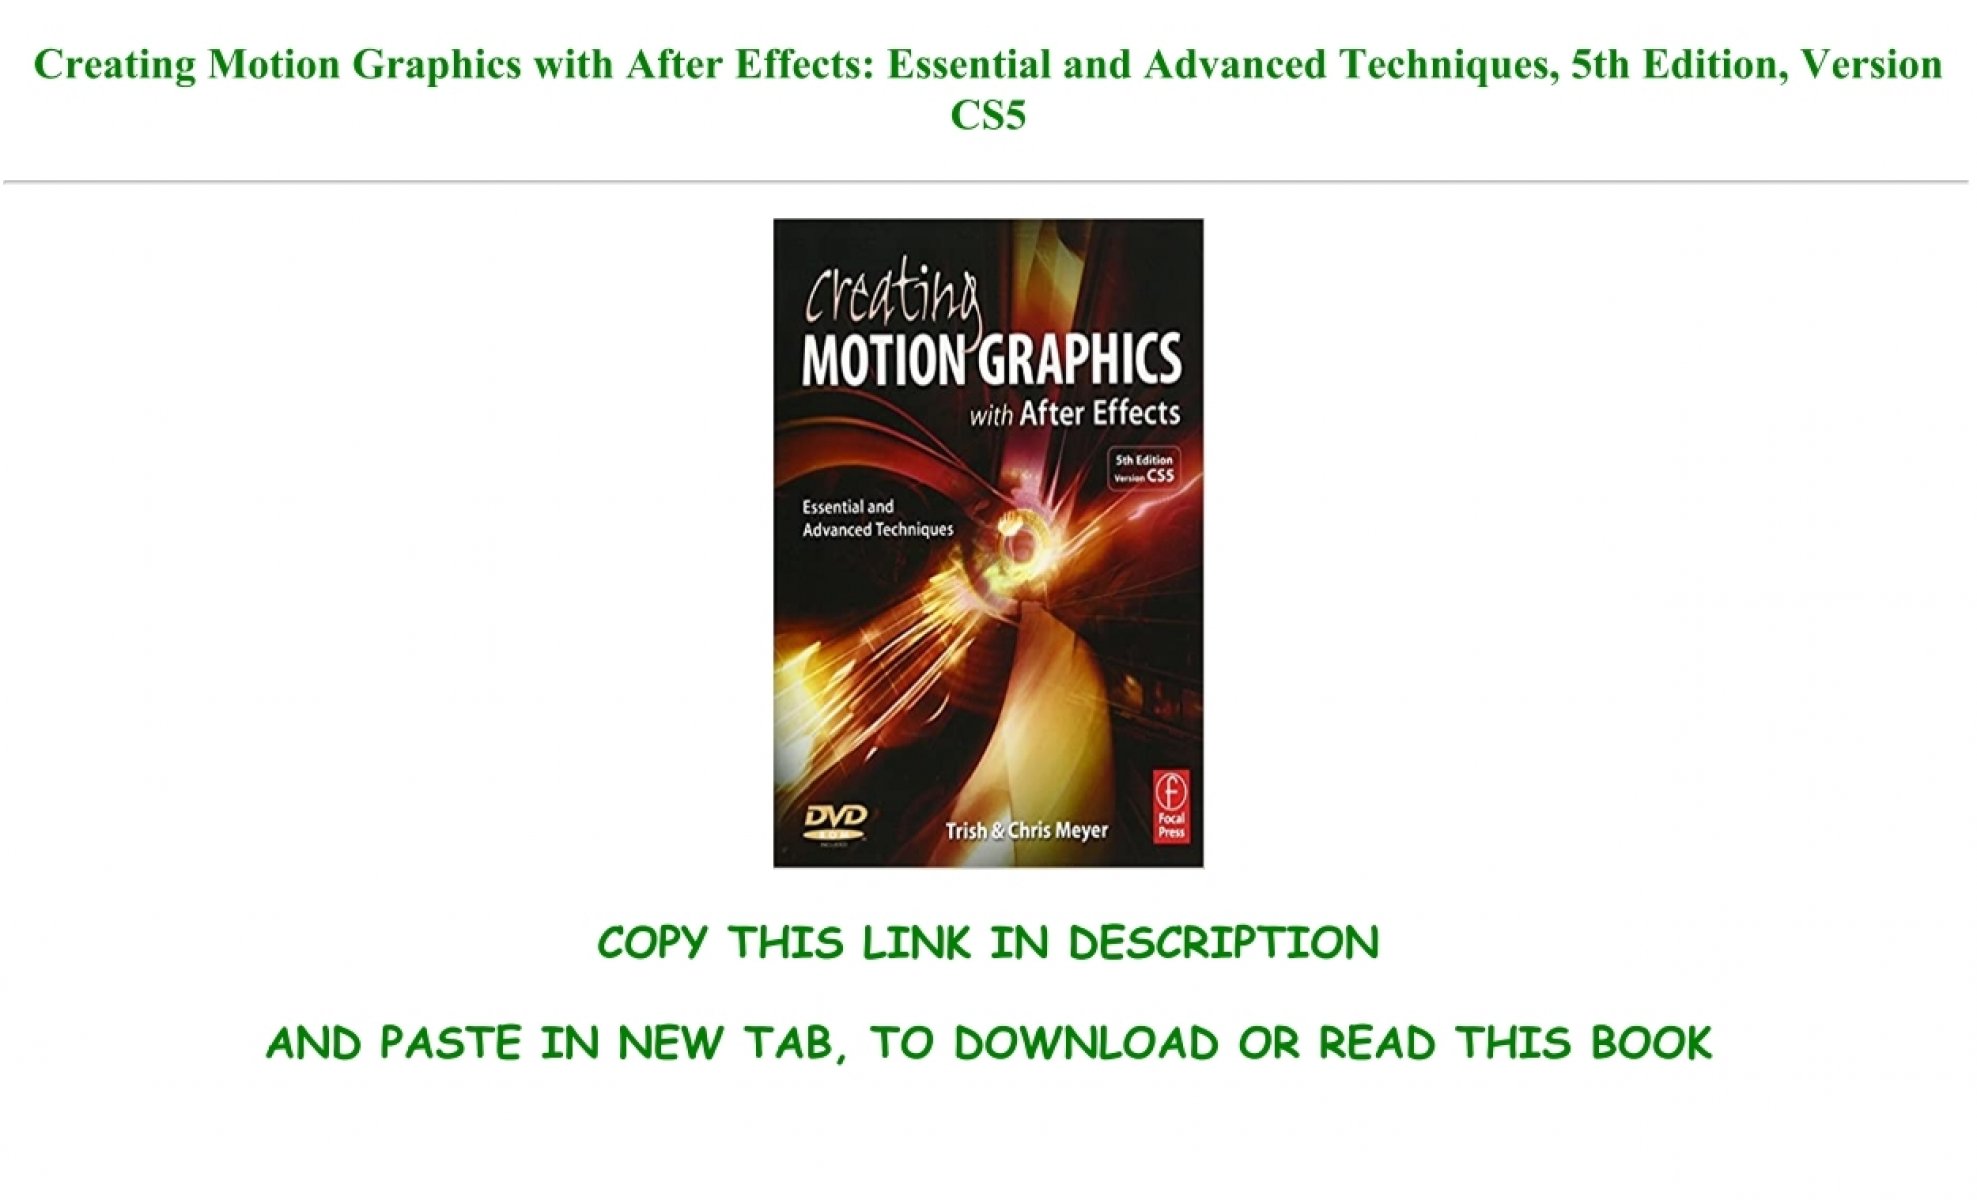 creating motion graphics with after effects 5th edition free download